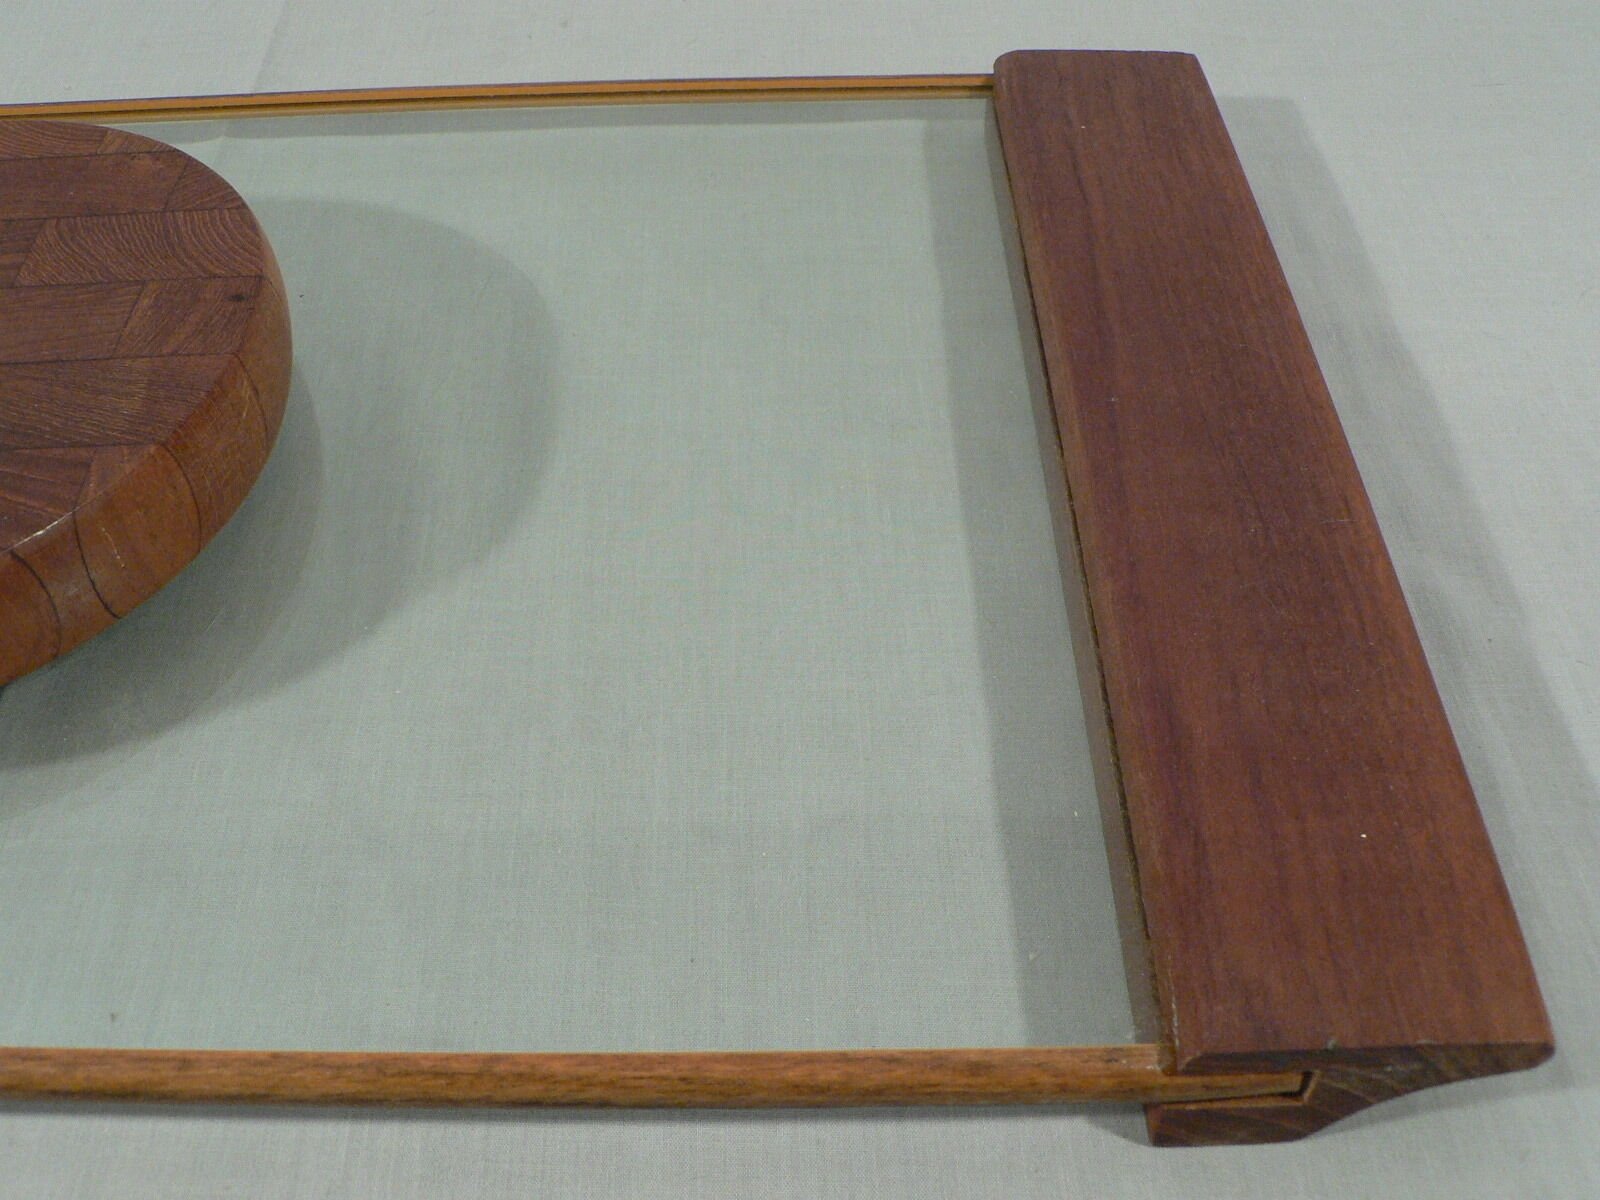 Vintage Retro glass serving tray with Cheese cutting board center mid-century